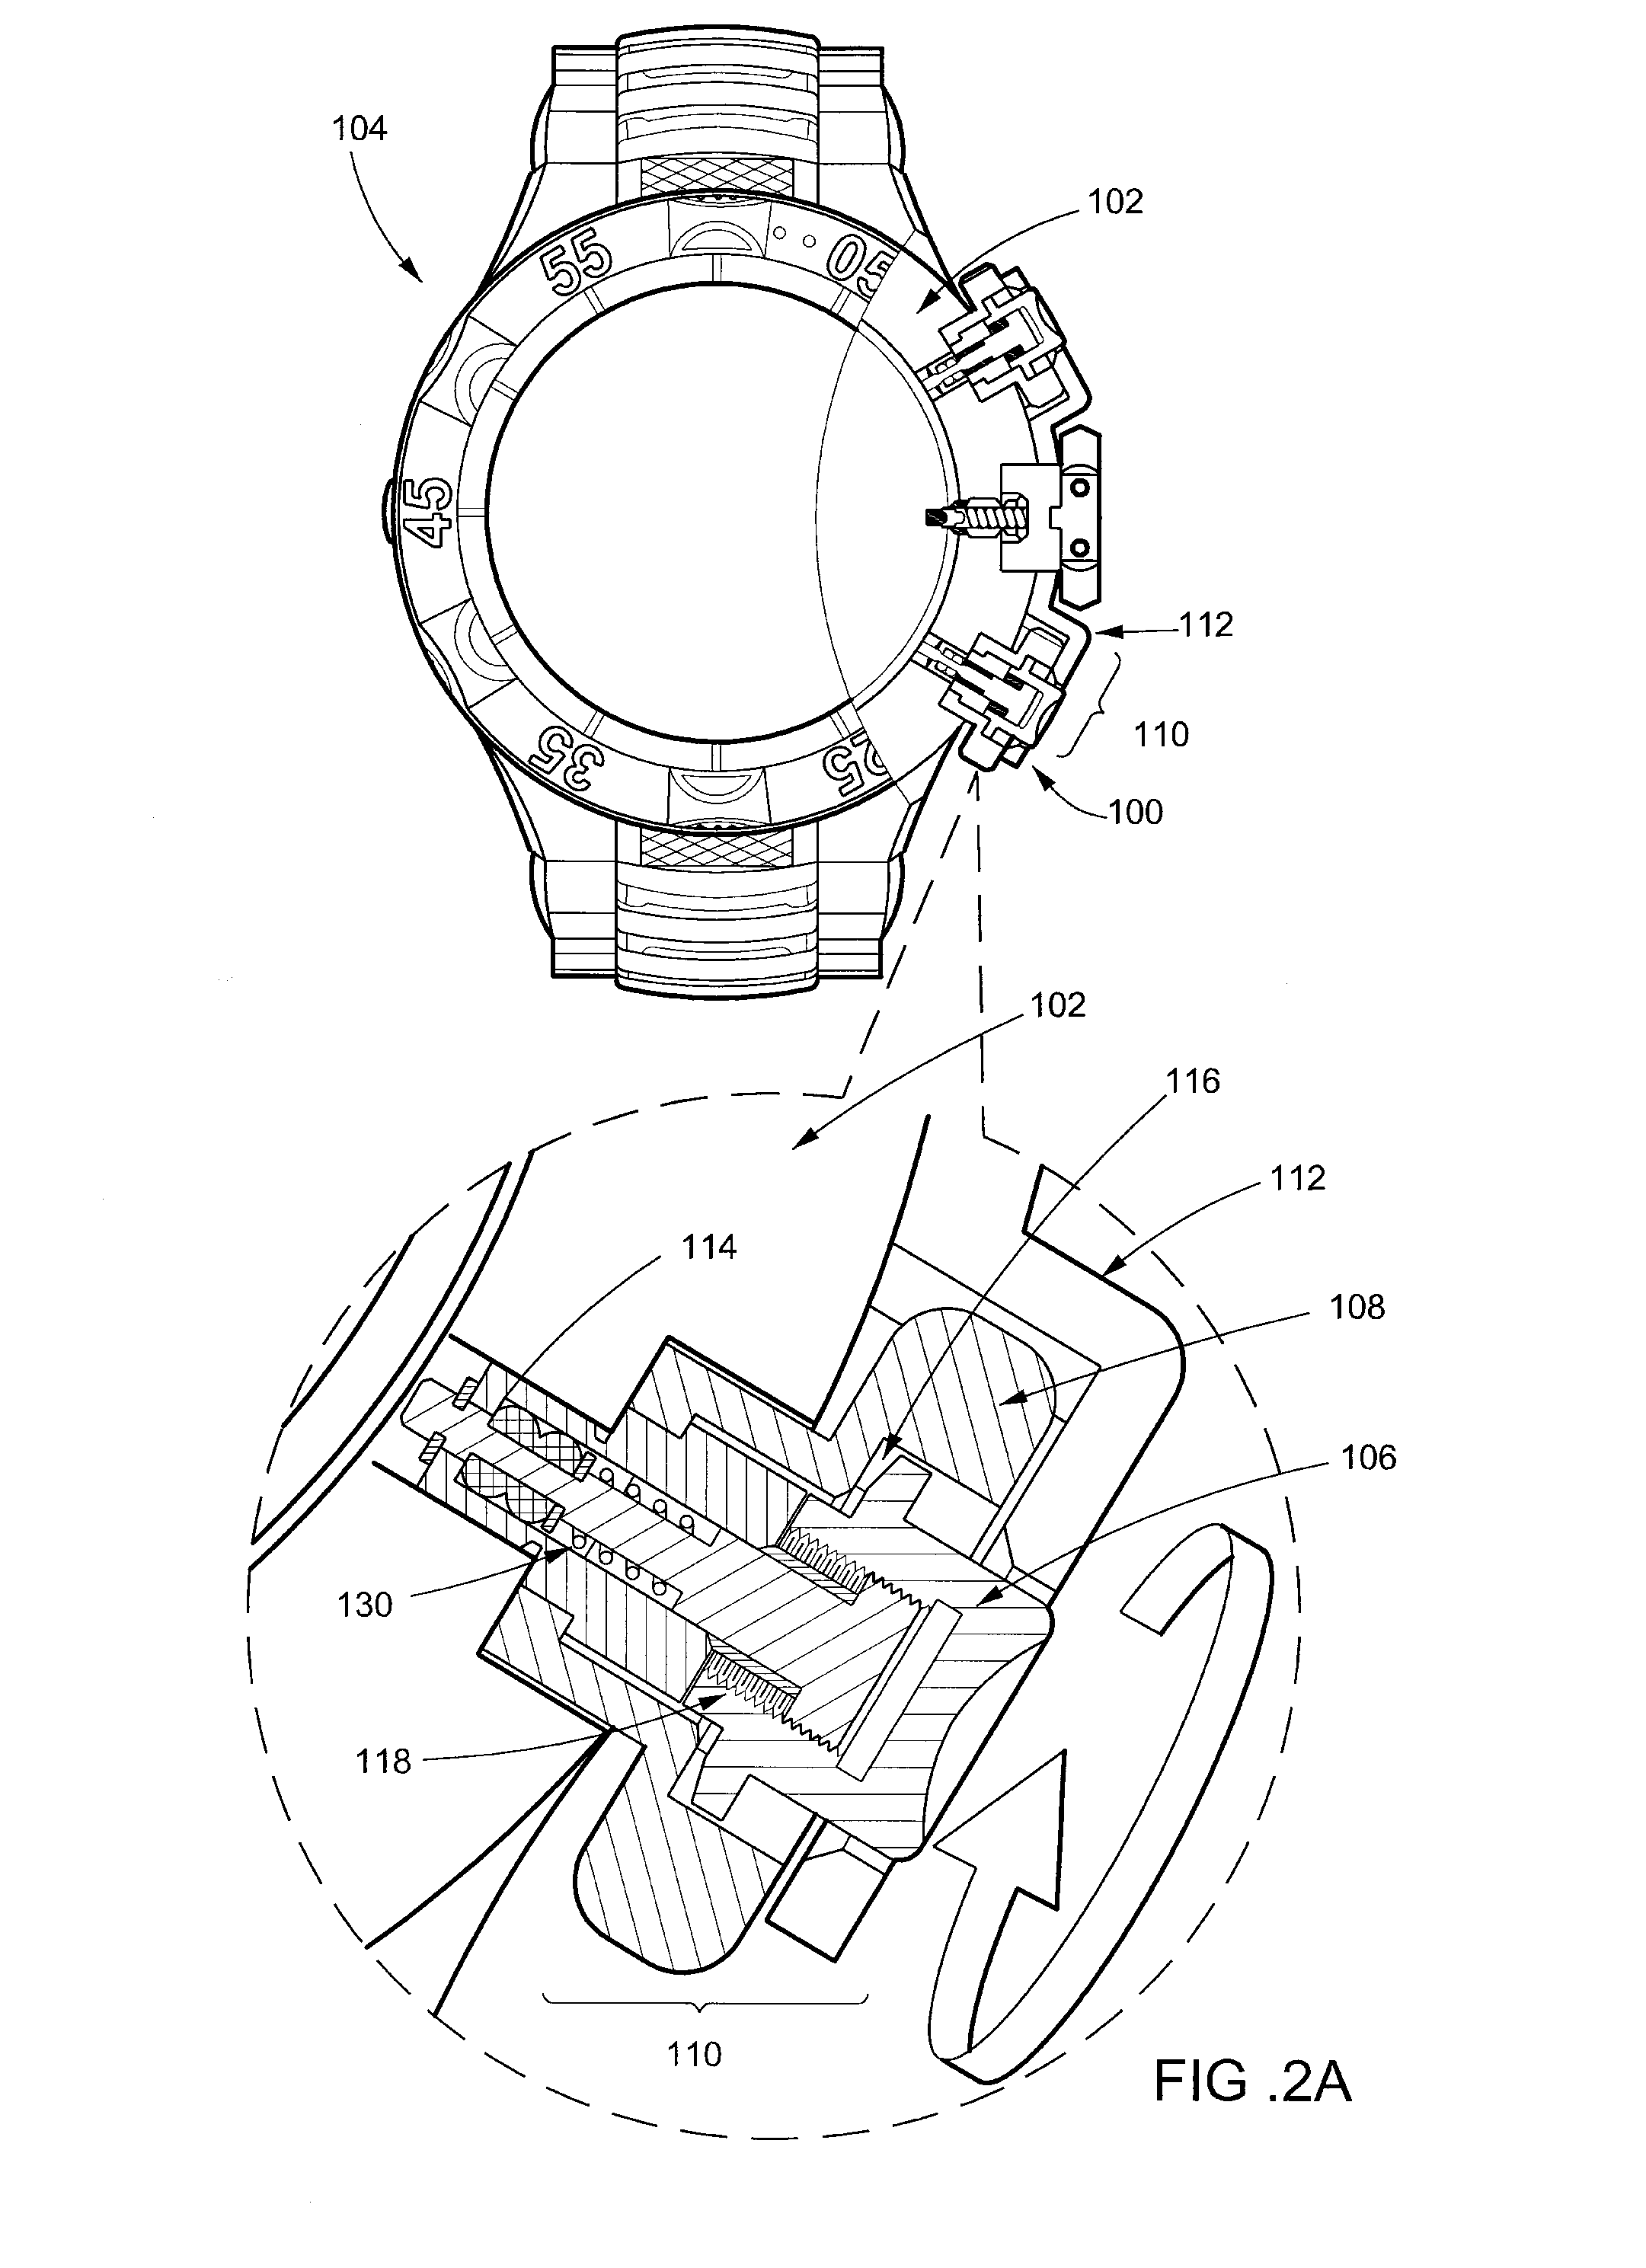 Interface for actuating a device